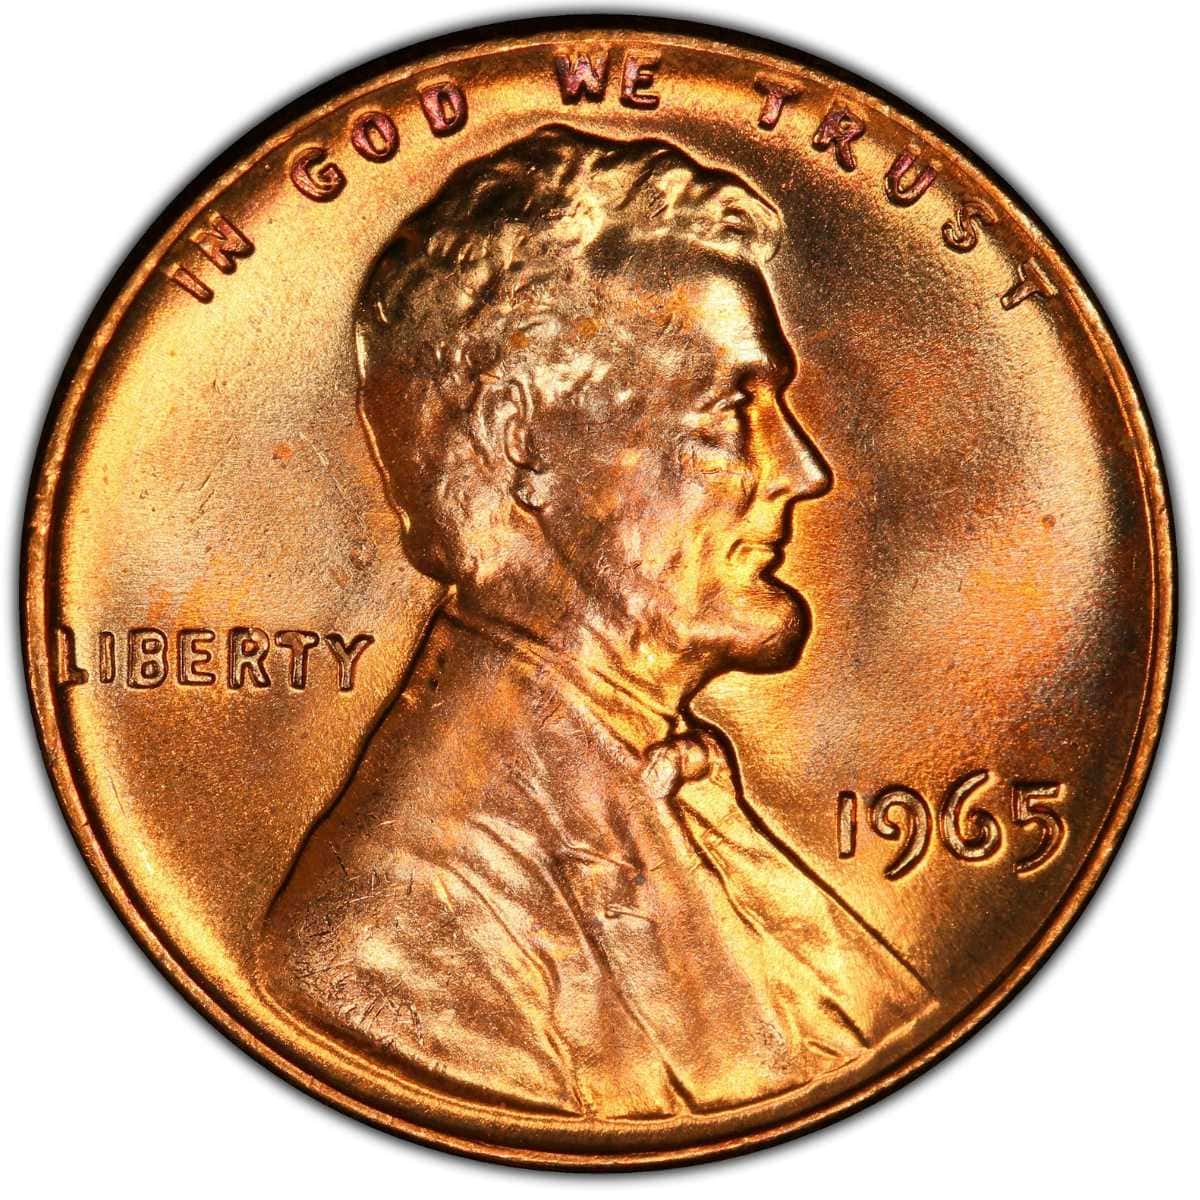 History of The 1965 Lincoln Cent